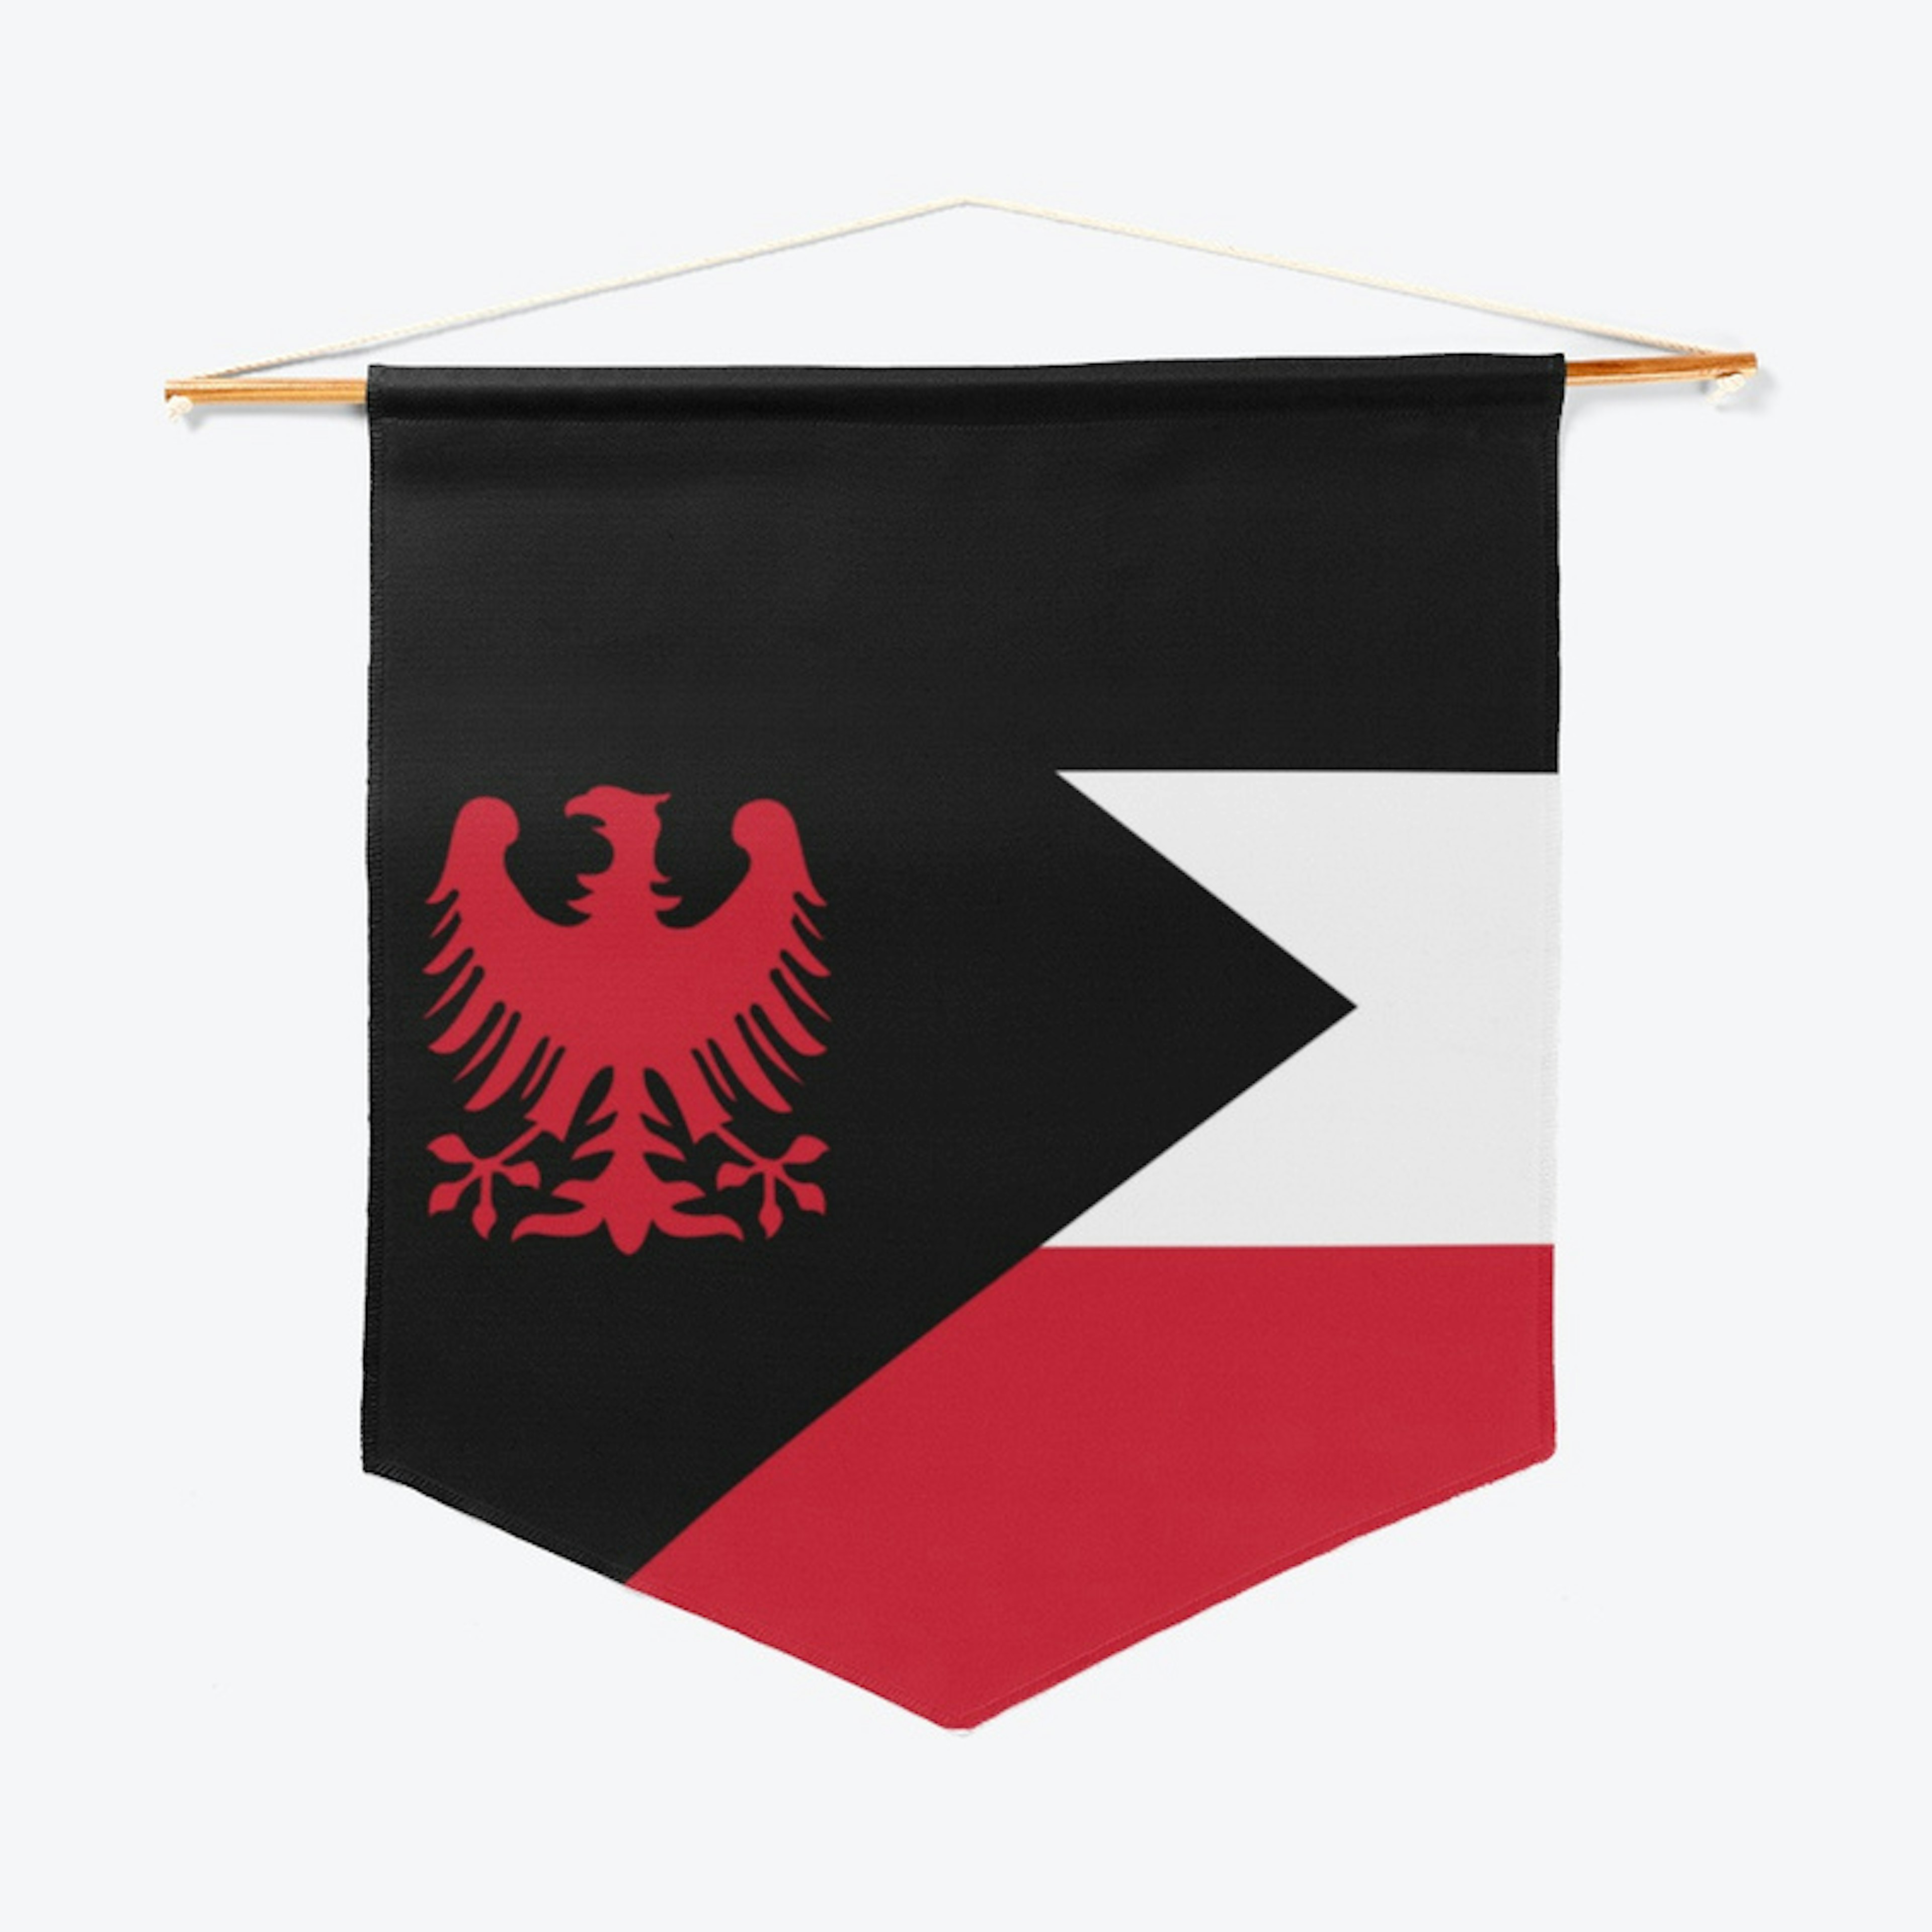 Bishnell Empire Pennant